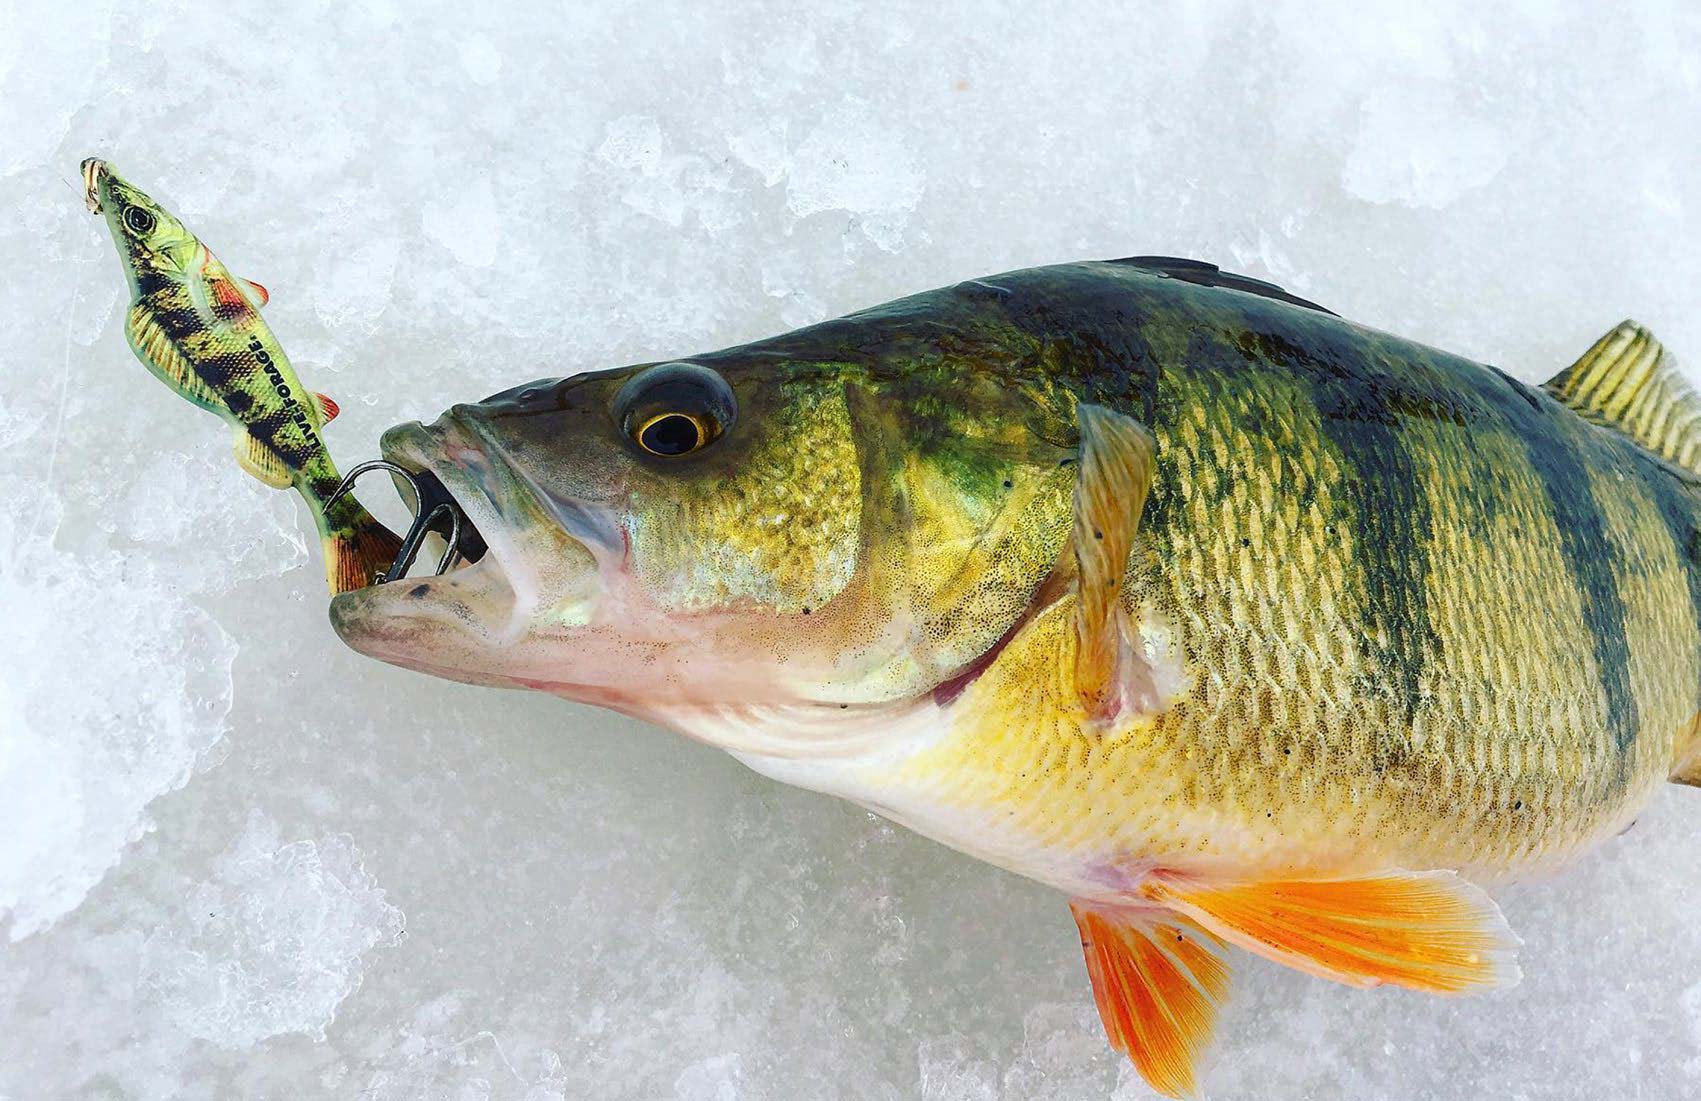 Quinte Jumbos: The Underrated Jumbo Perch Fishery of Southern